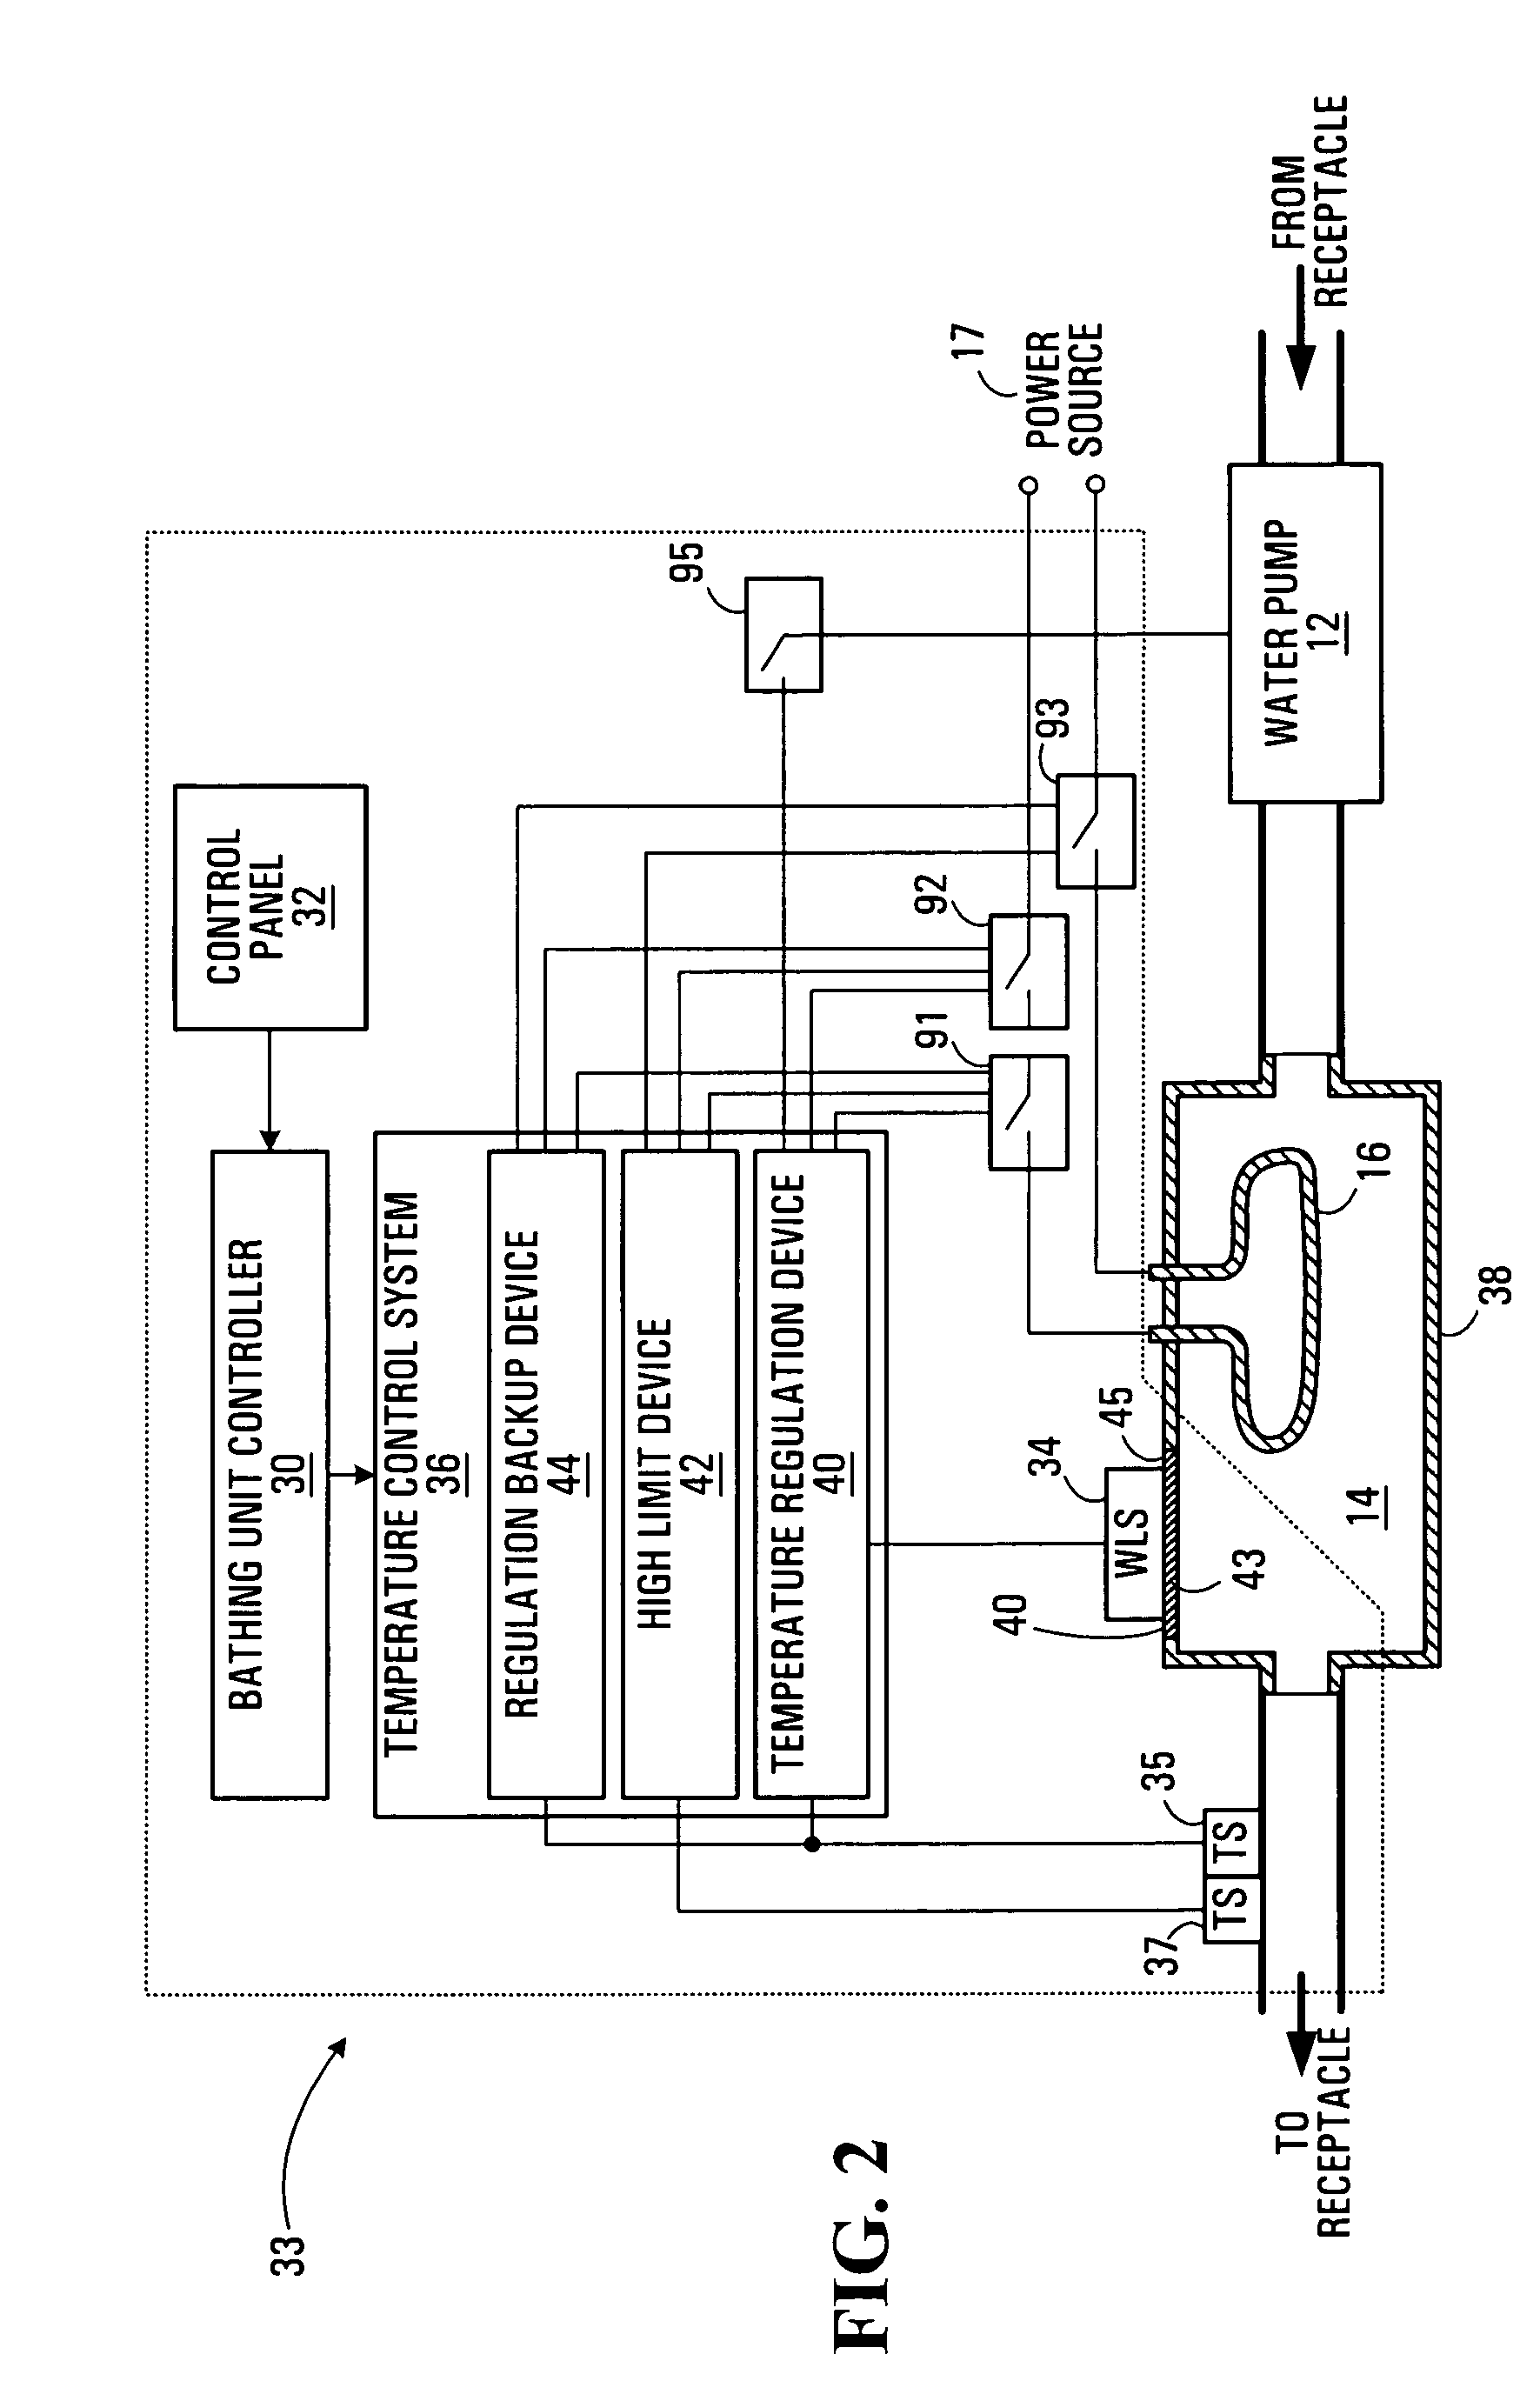 Temperature control system for a bathing unit